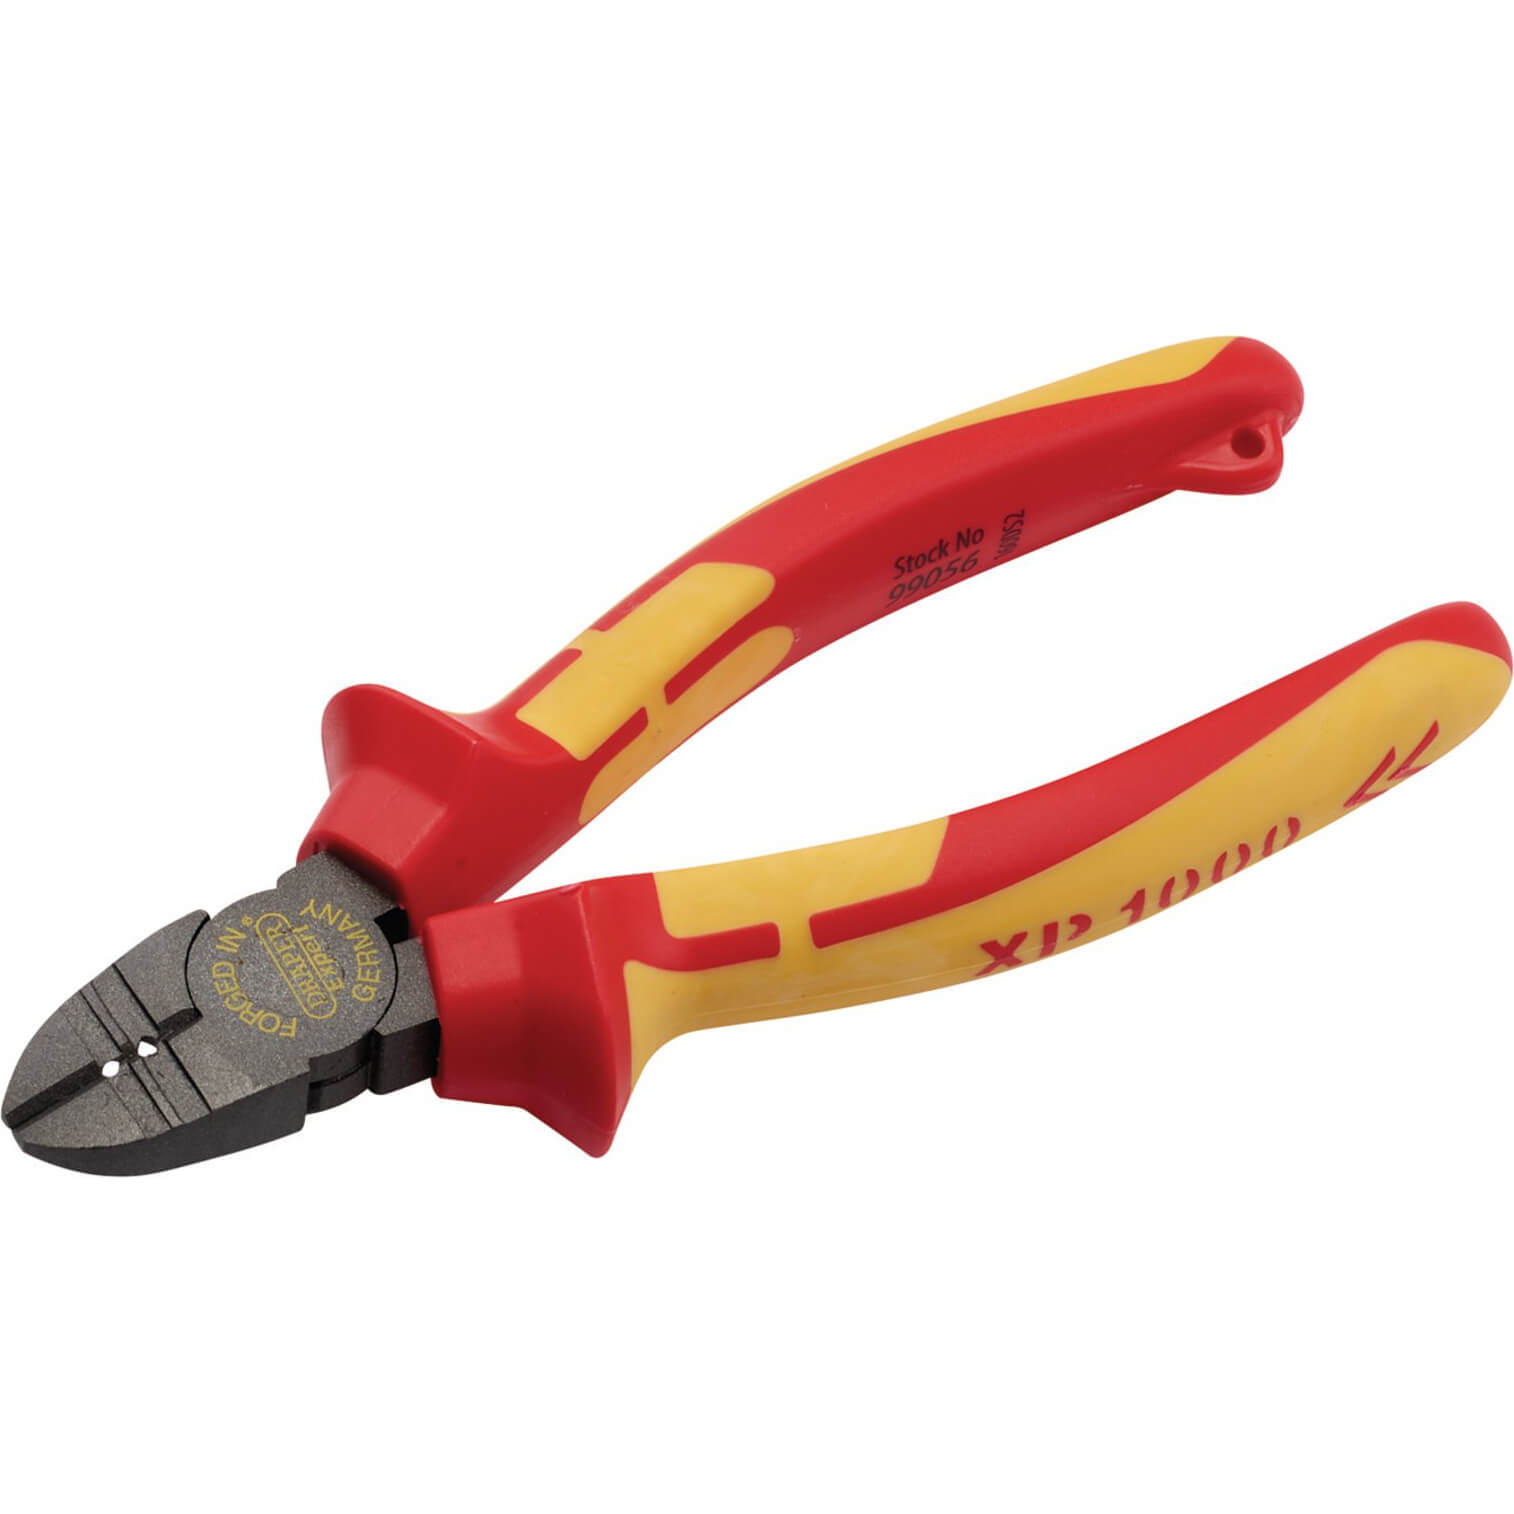 Photos - Utility Knife Draper XP1000 VDE Tethered Side Cutter Wire Stripper Pliers 160mm 99056 